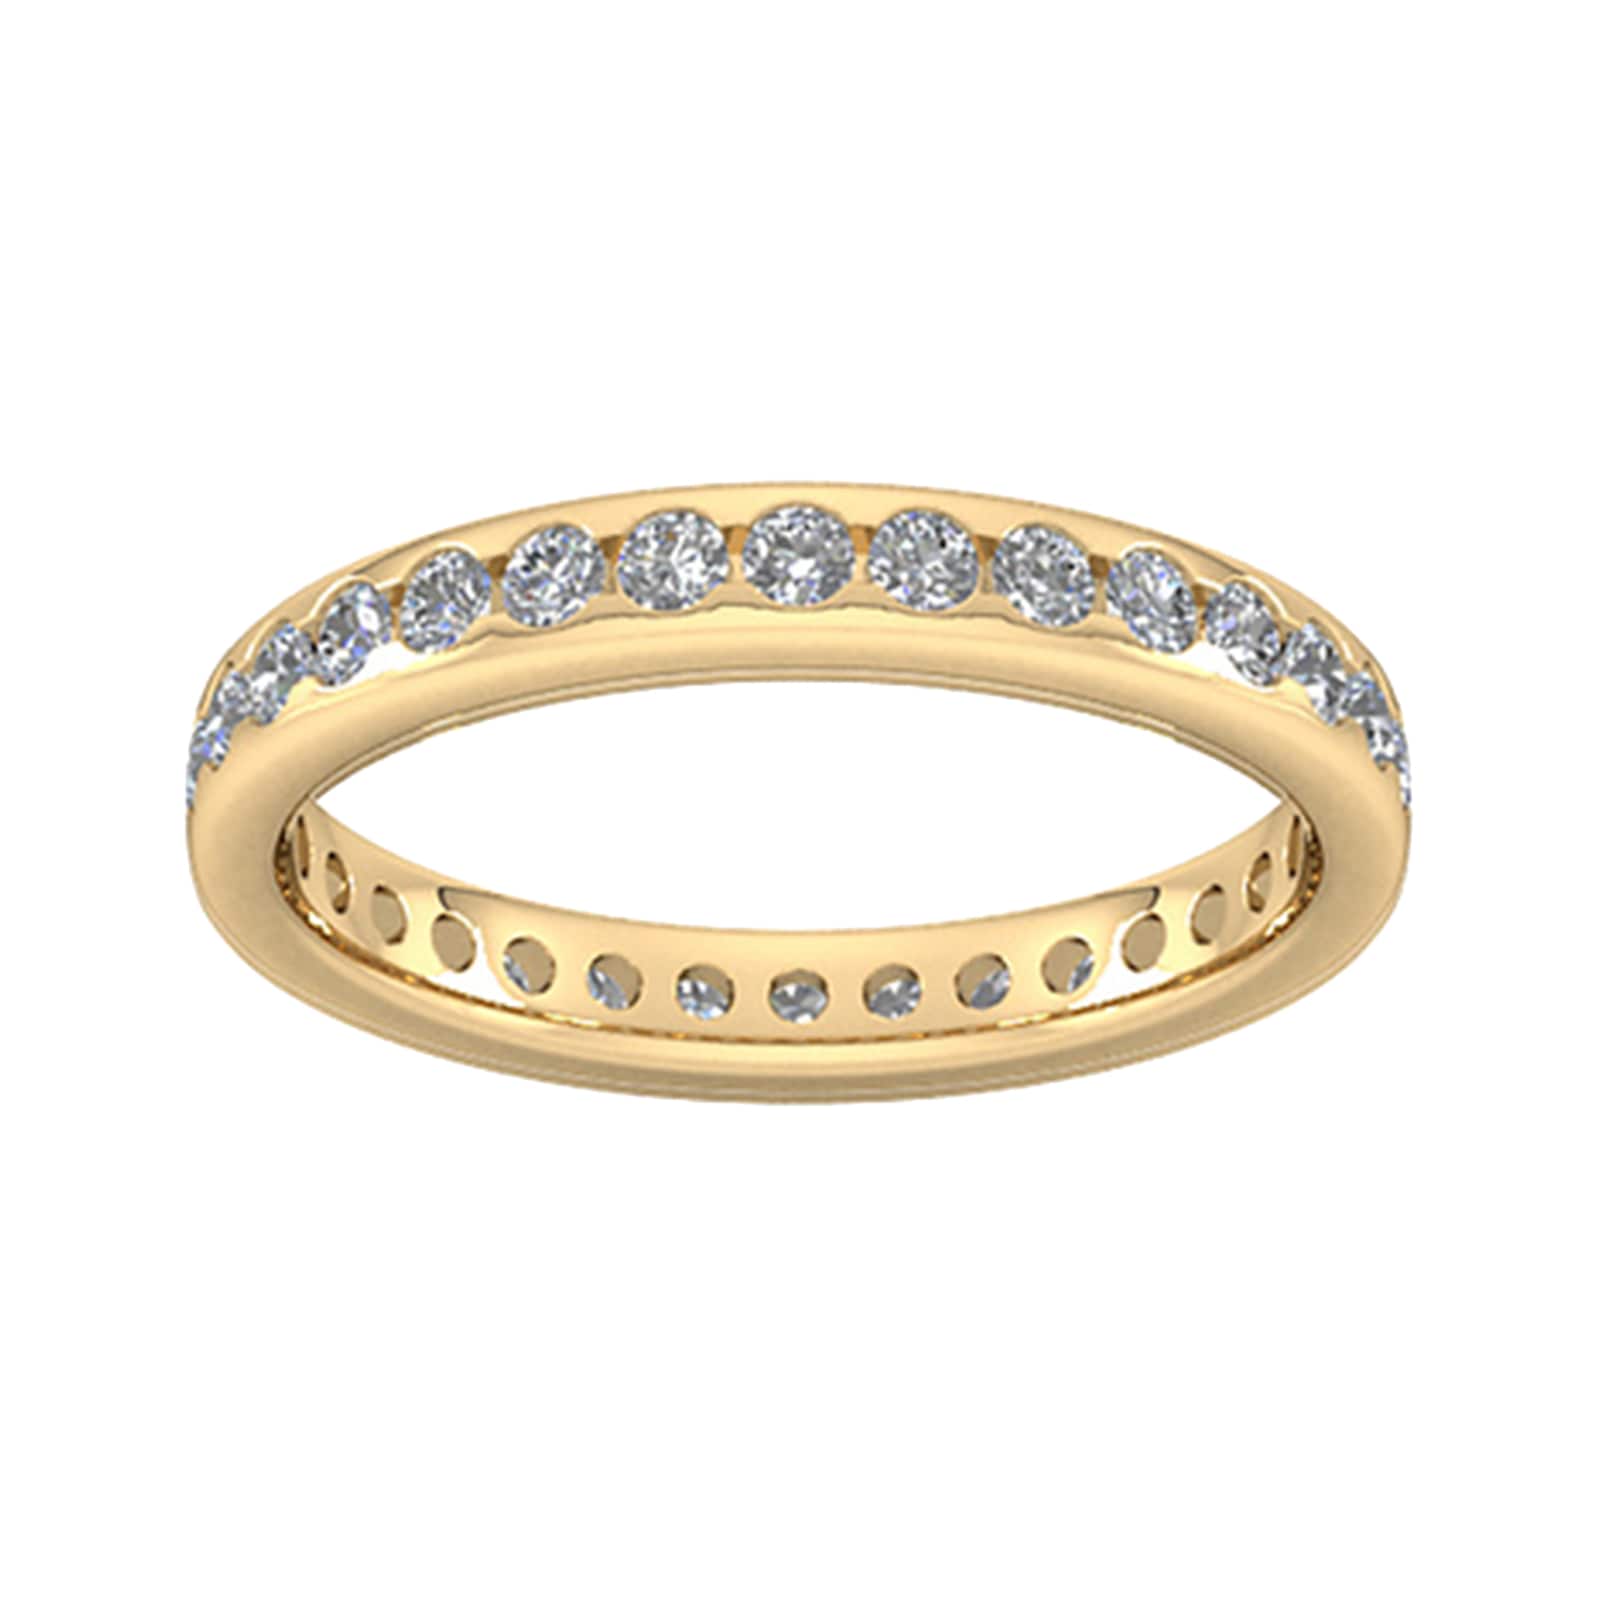 0.81 Carat Total Weight Brilliant Cut Scalloped Channel Set Diamond Wedding Ring In 9 Carat Yellow Gold - Ring Size W